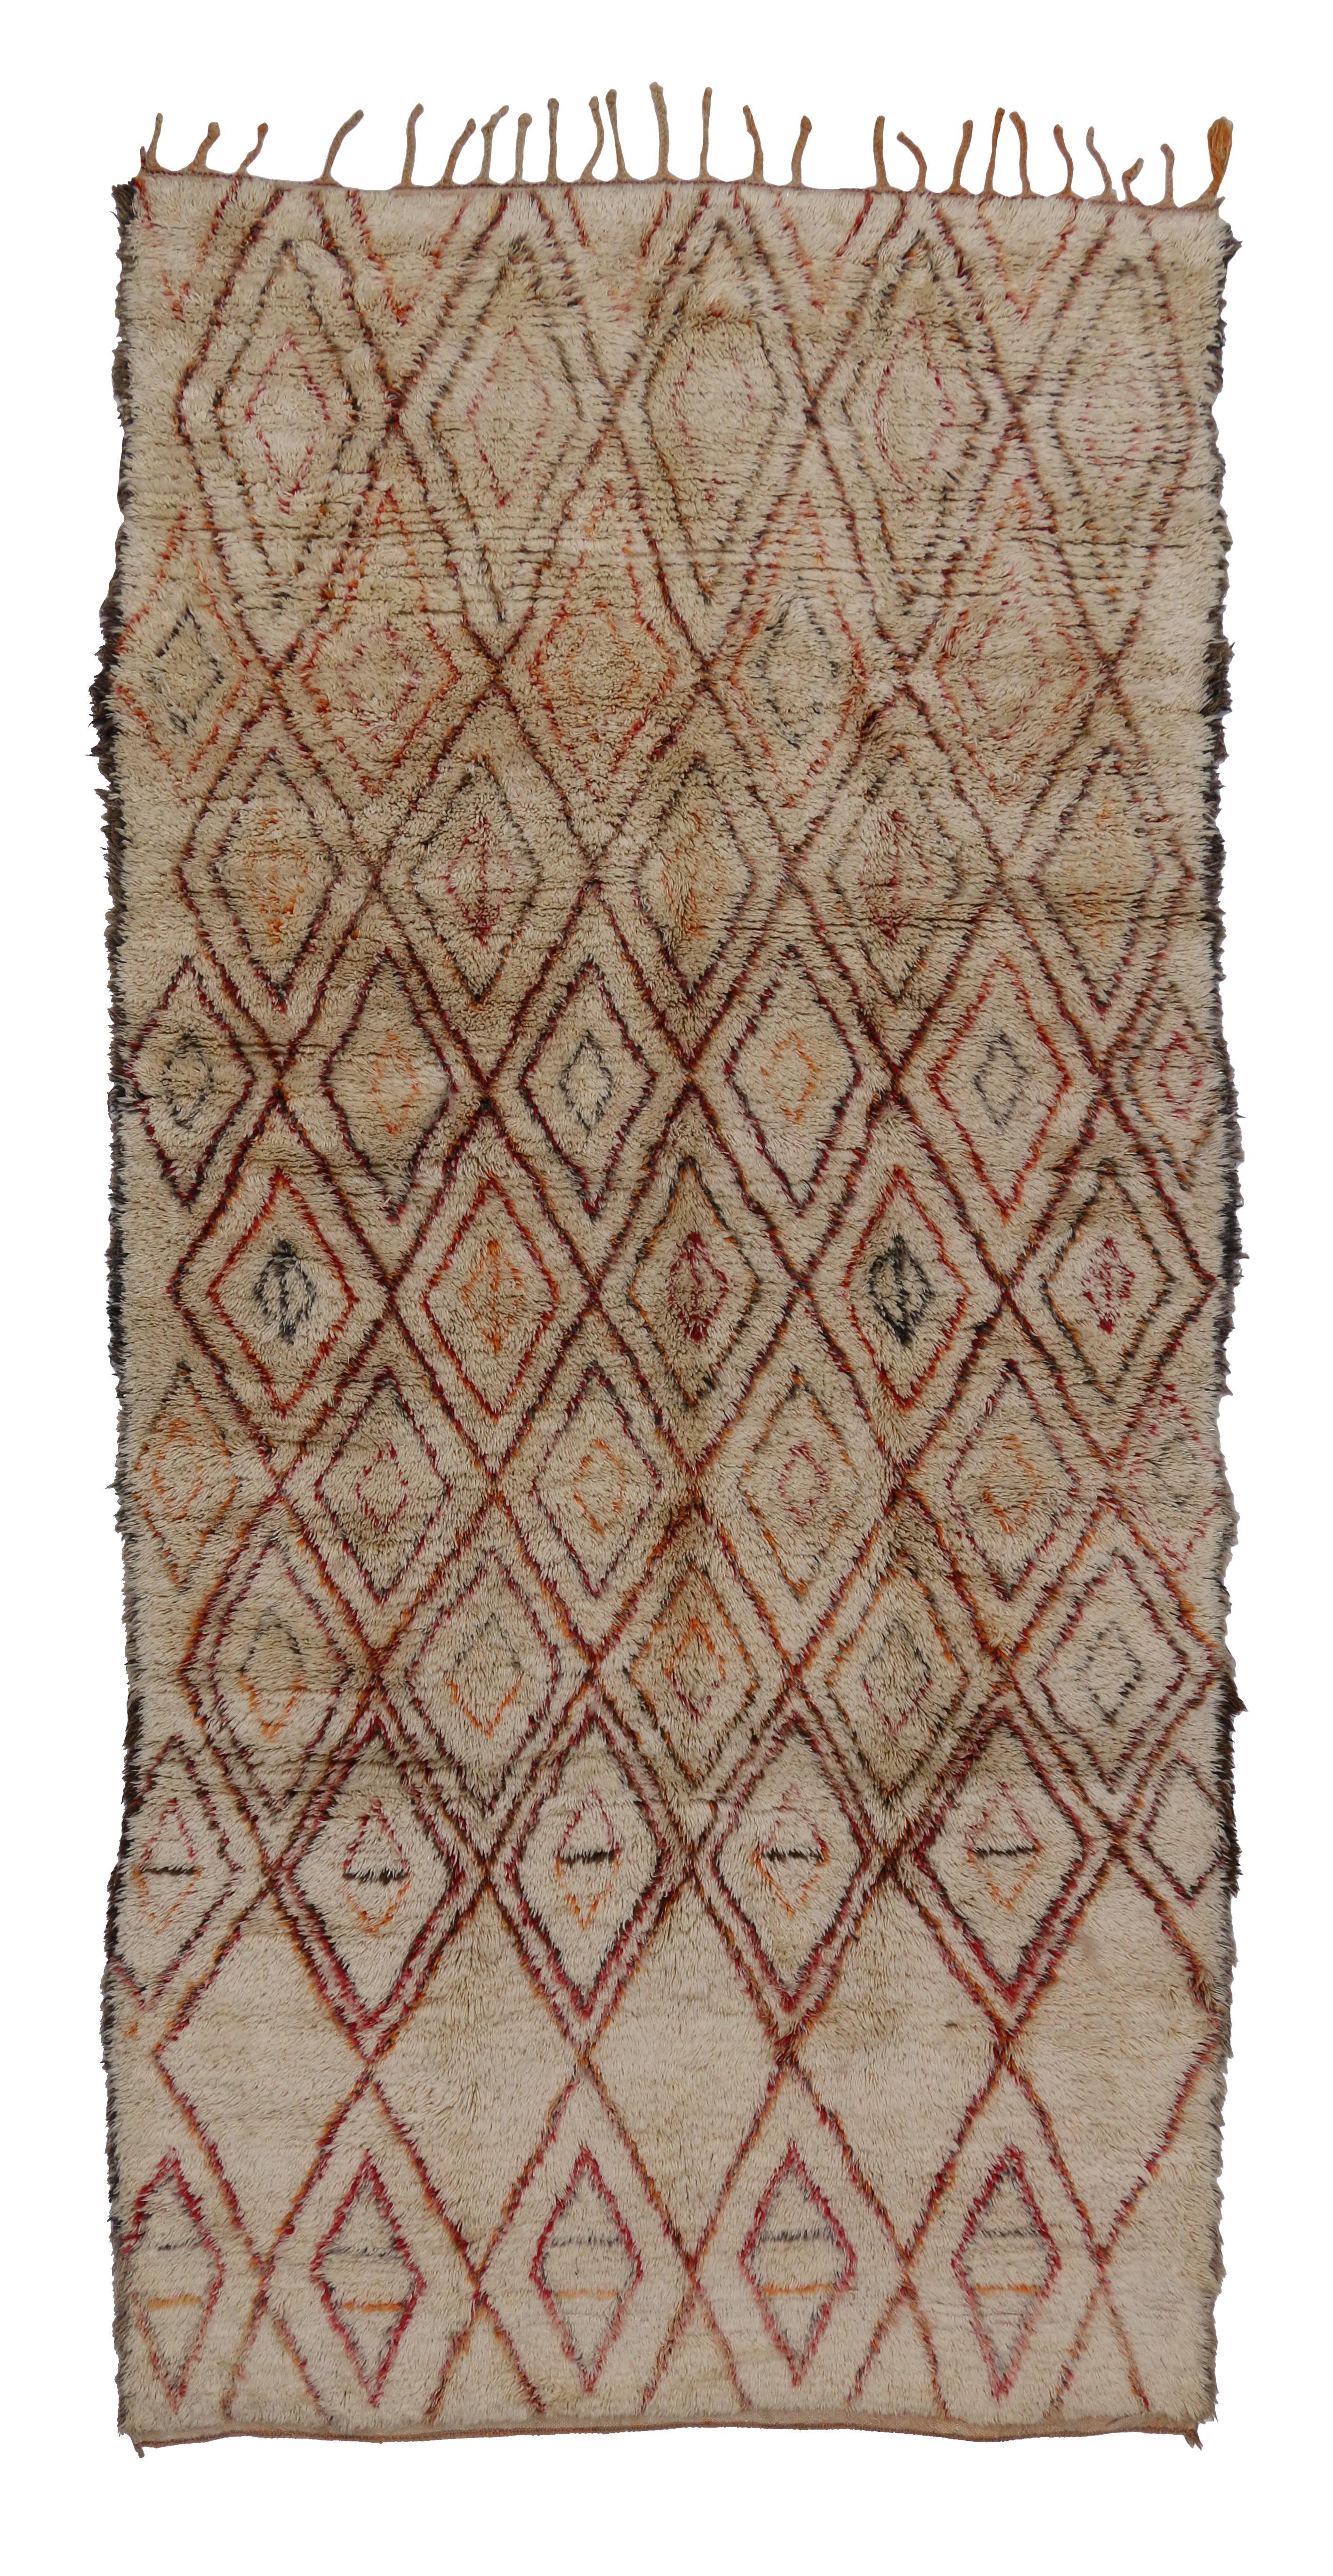 20th Century Mid-Century Modern Beni Ourain Moroccan Rug with Tribal Designs